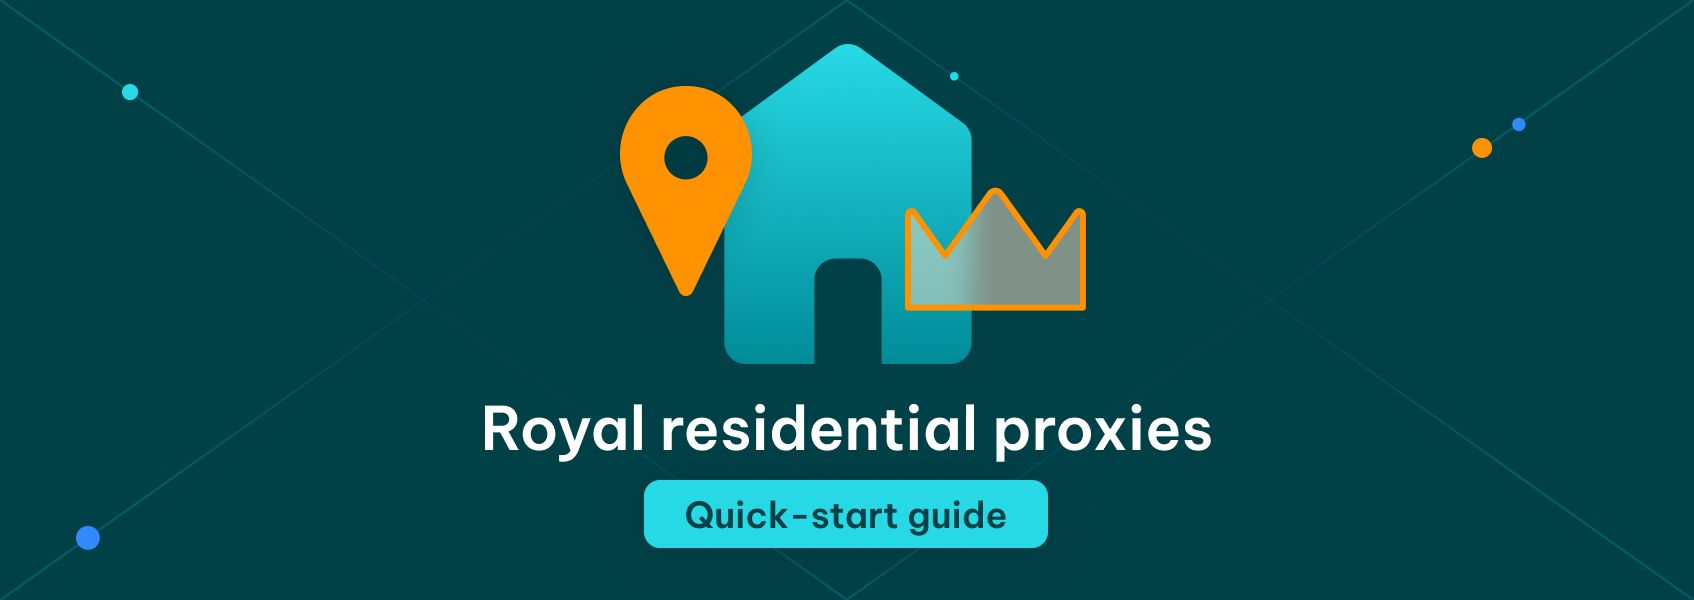 IPRoyal residential proxies quick start guide